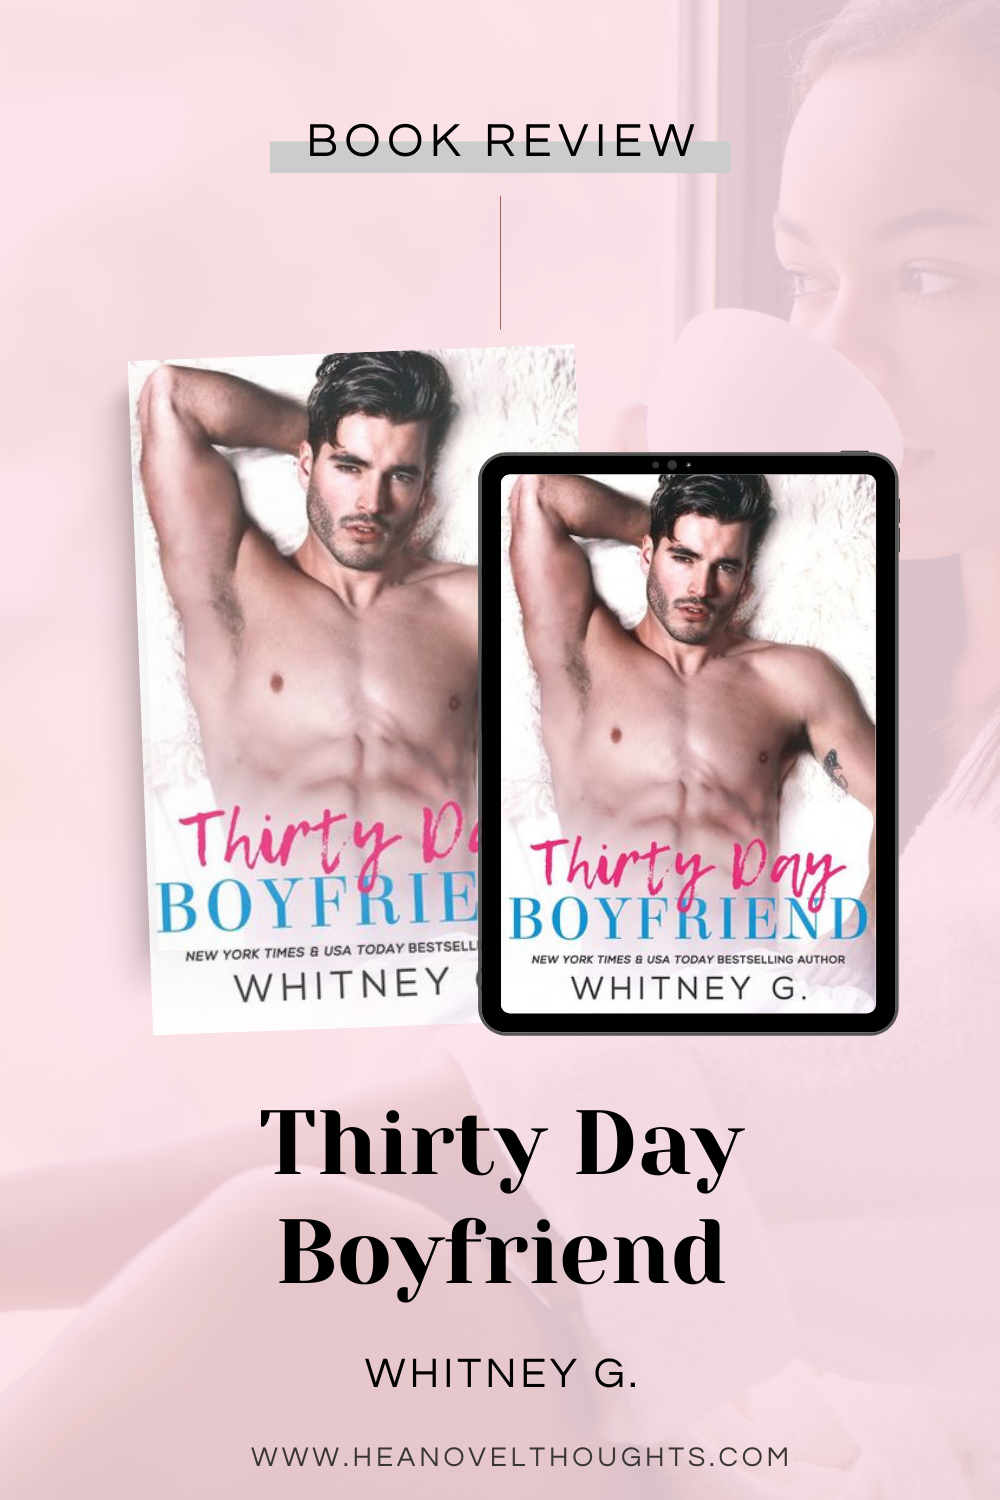 Review of Thirty Day Boyfriend by Whitney G